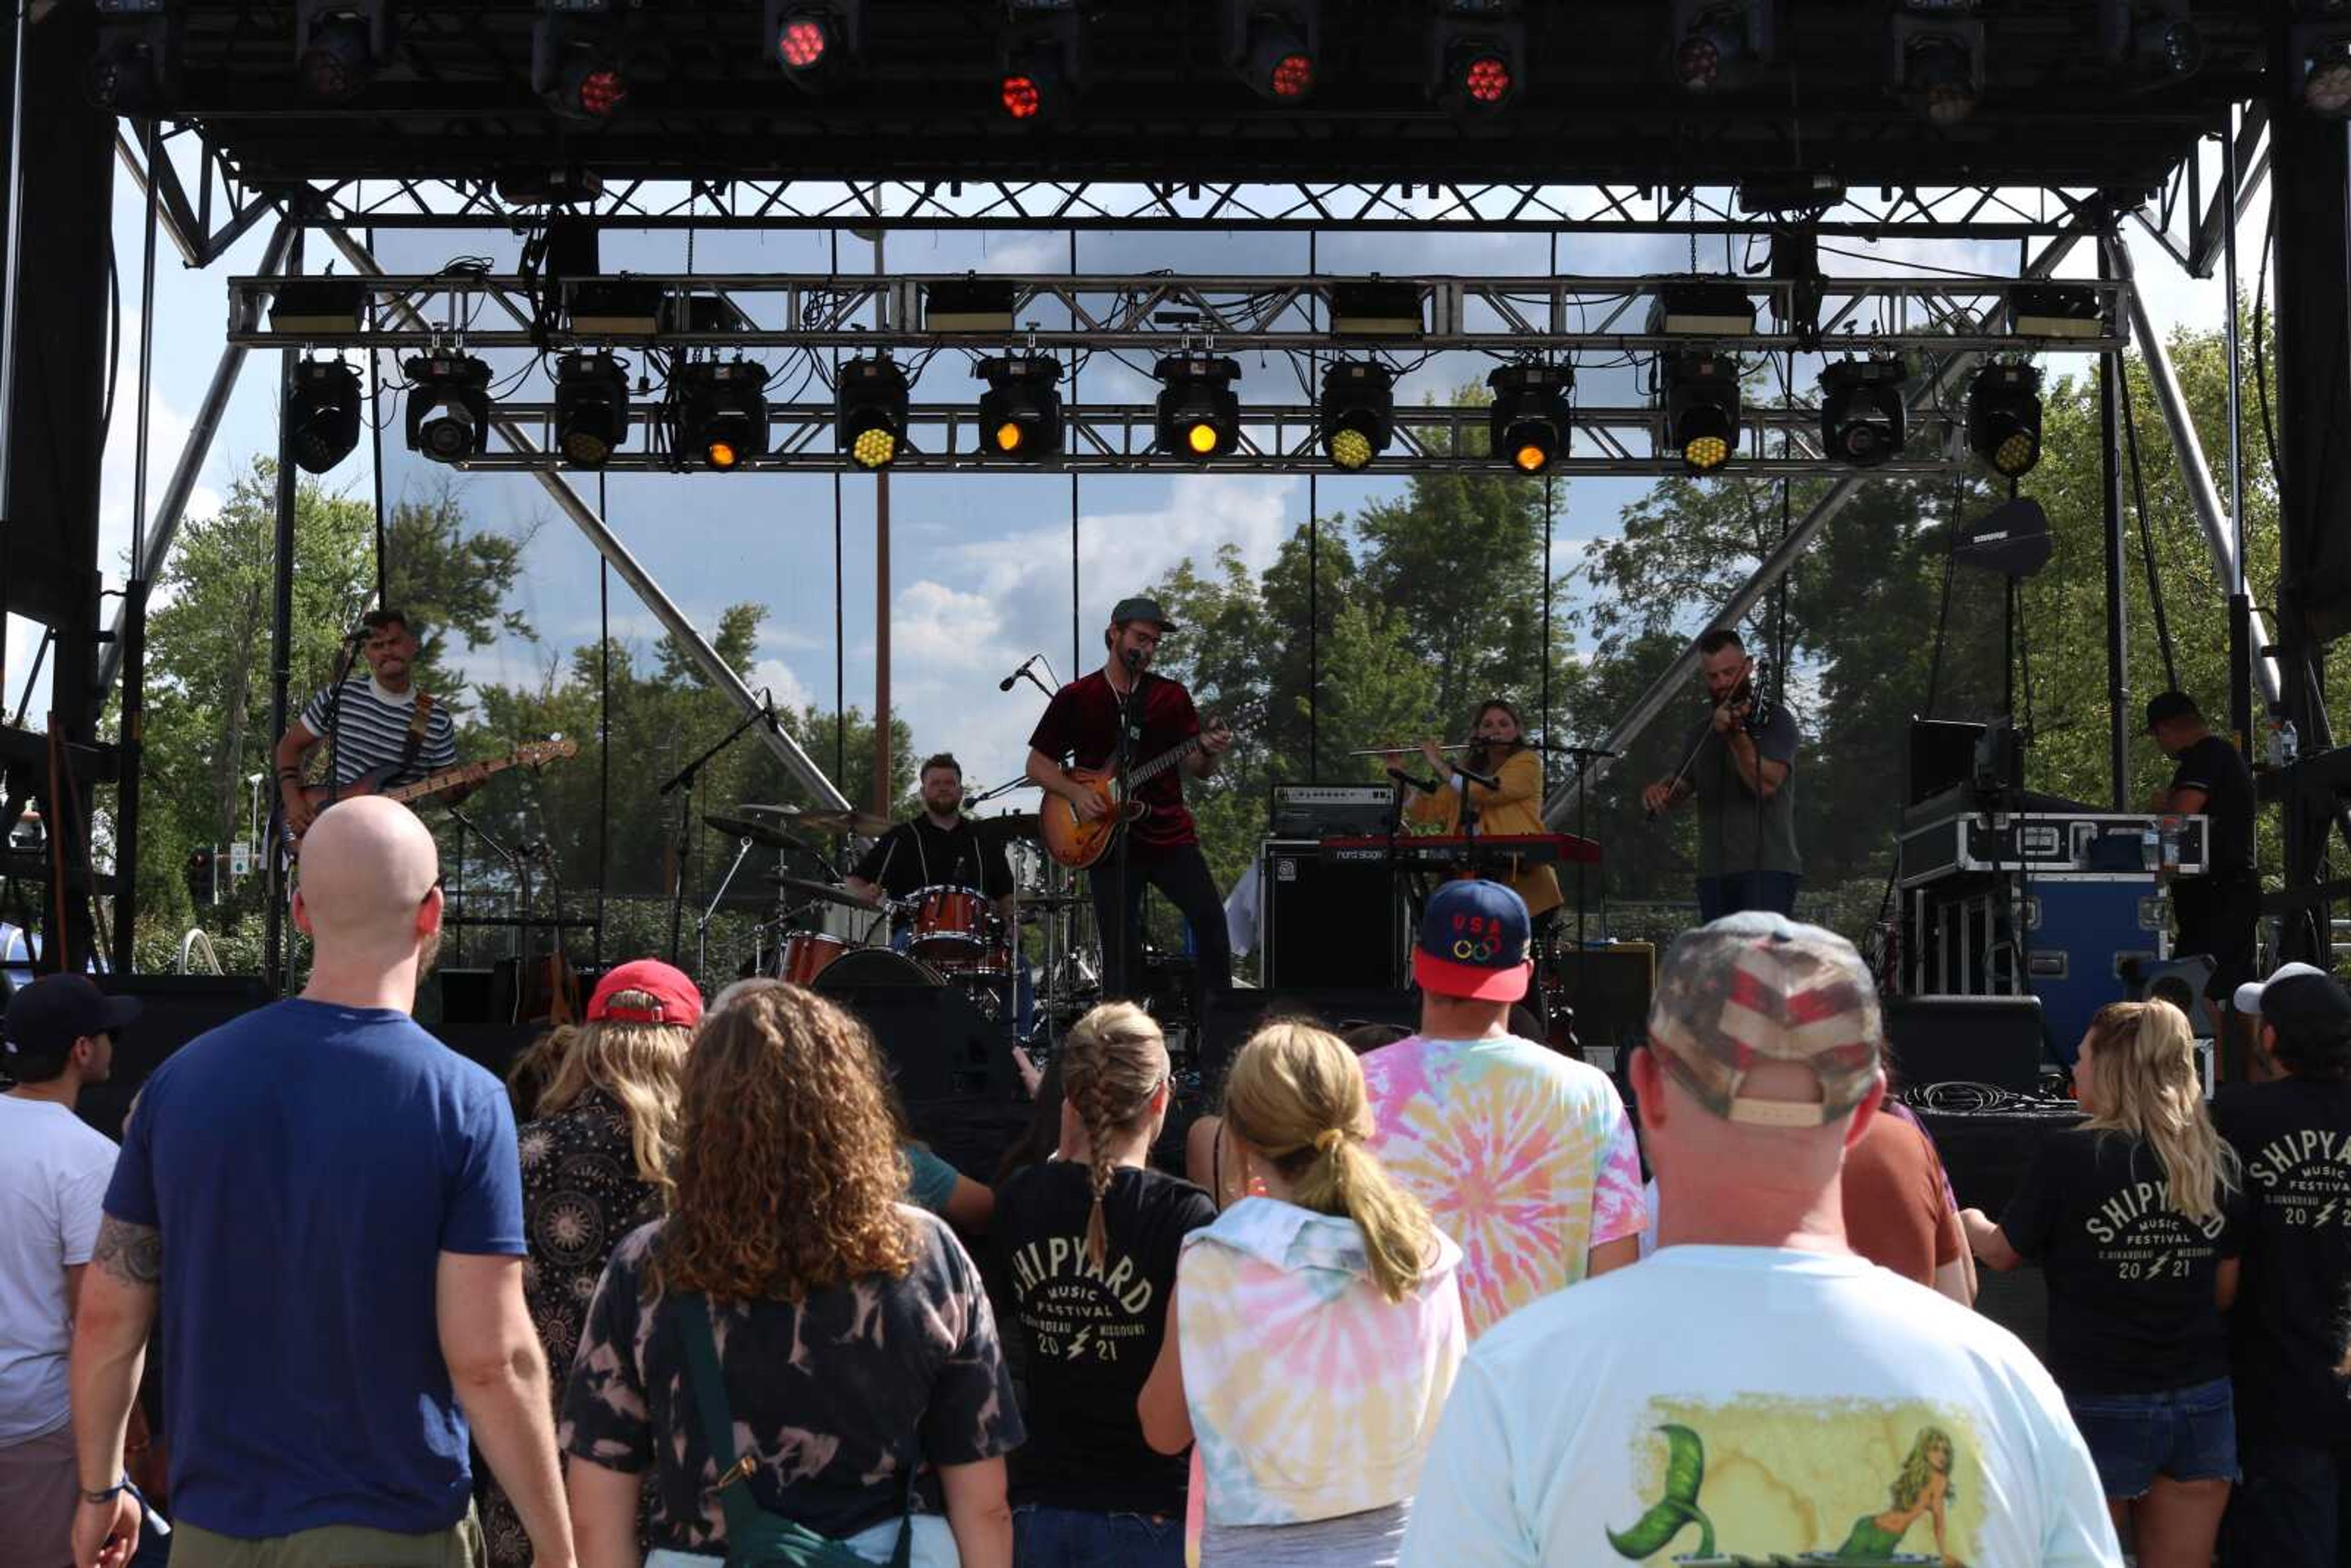 Shipyard Music Festival brings live music, food and entertainment to SEMO community